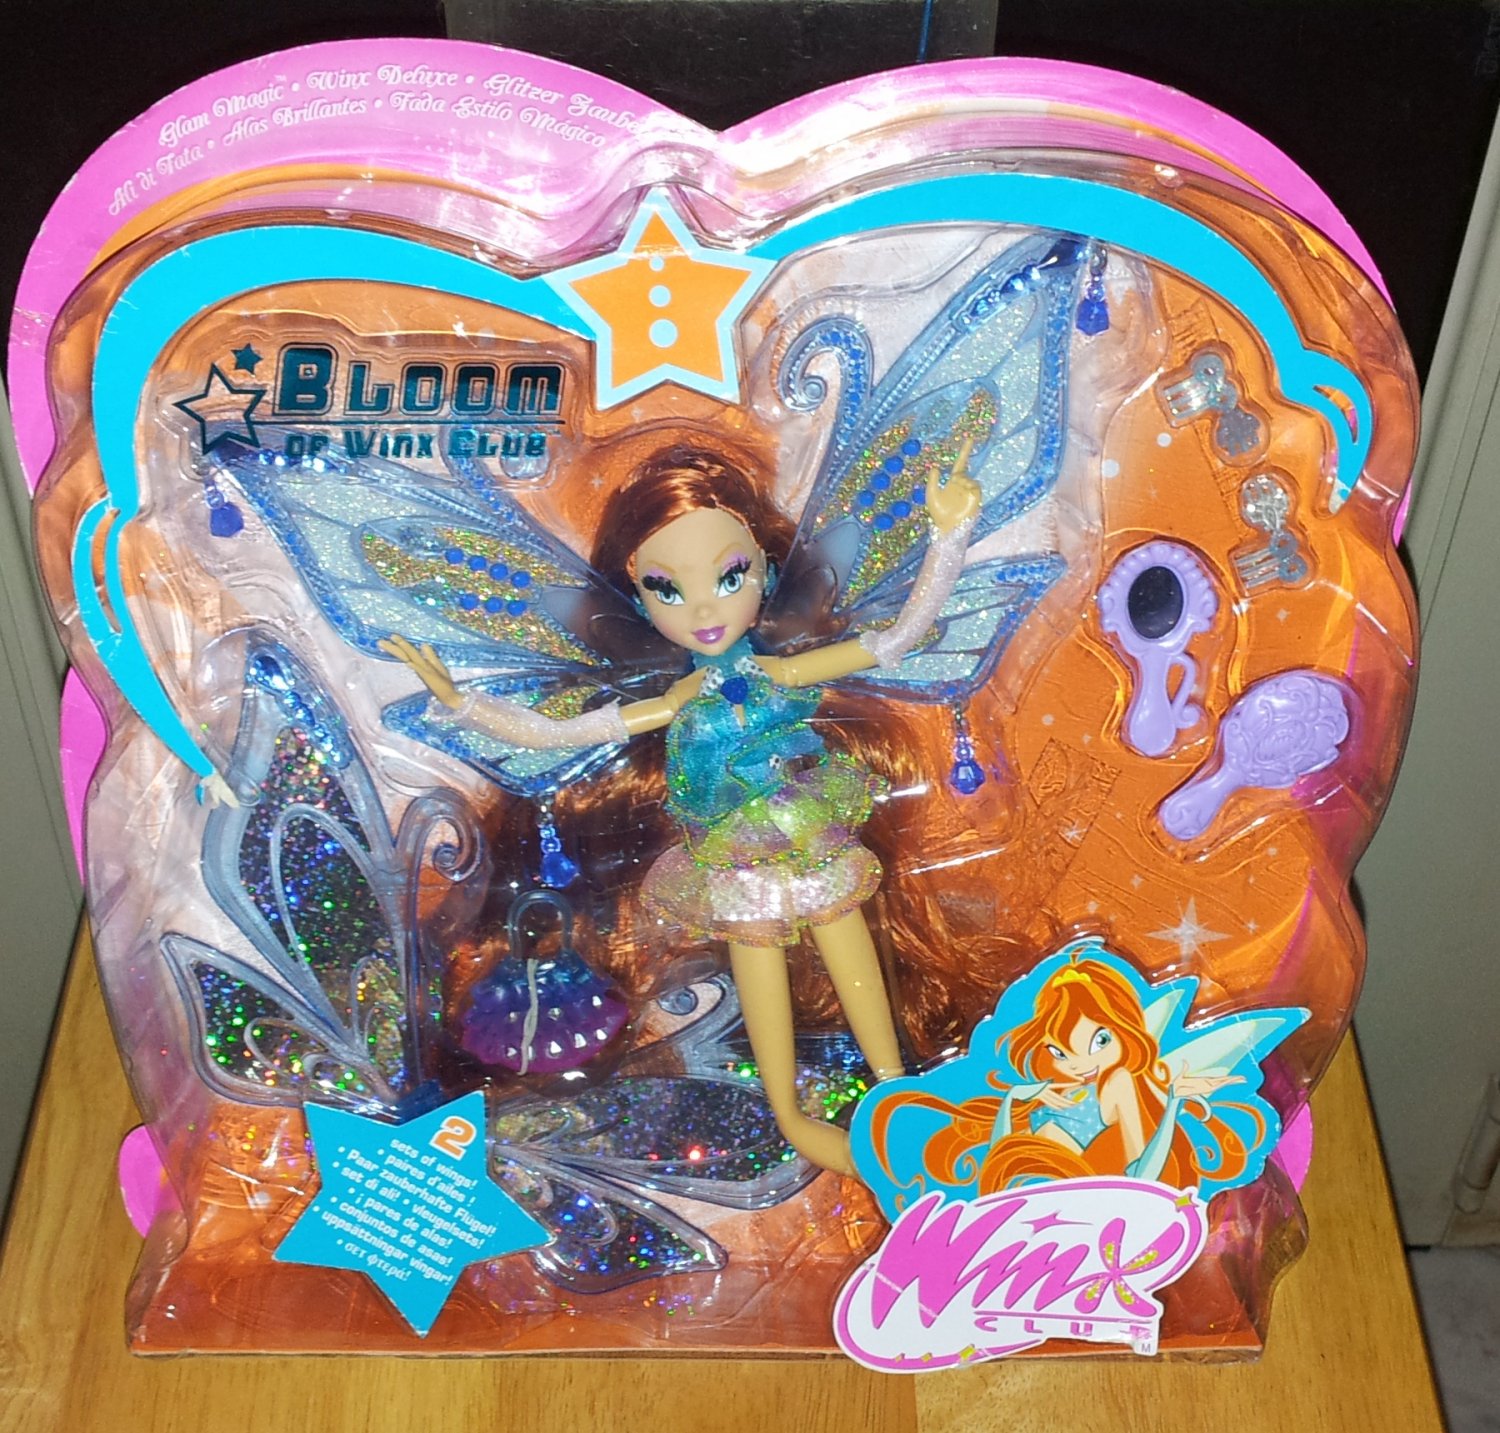 Bloom Of Winx Club Glam Magic Enchantix Doll With 2 Sets Of Wings